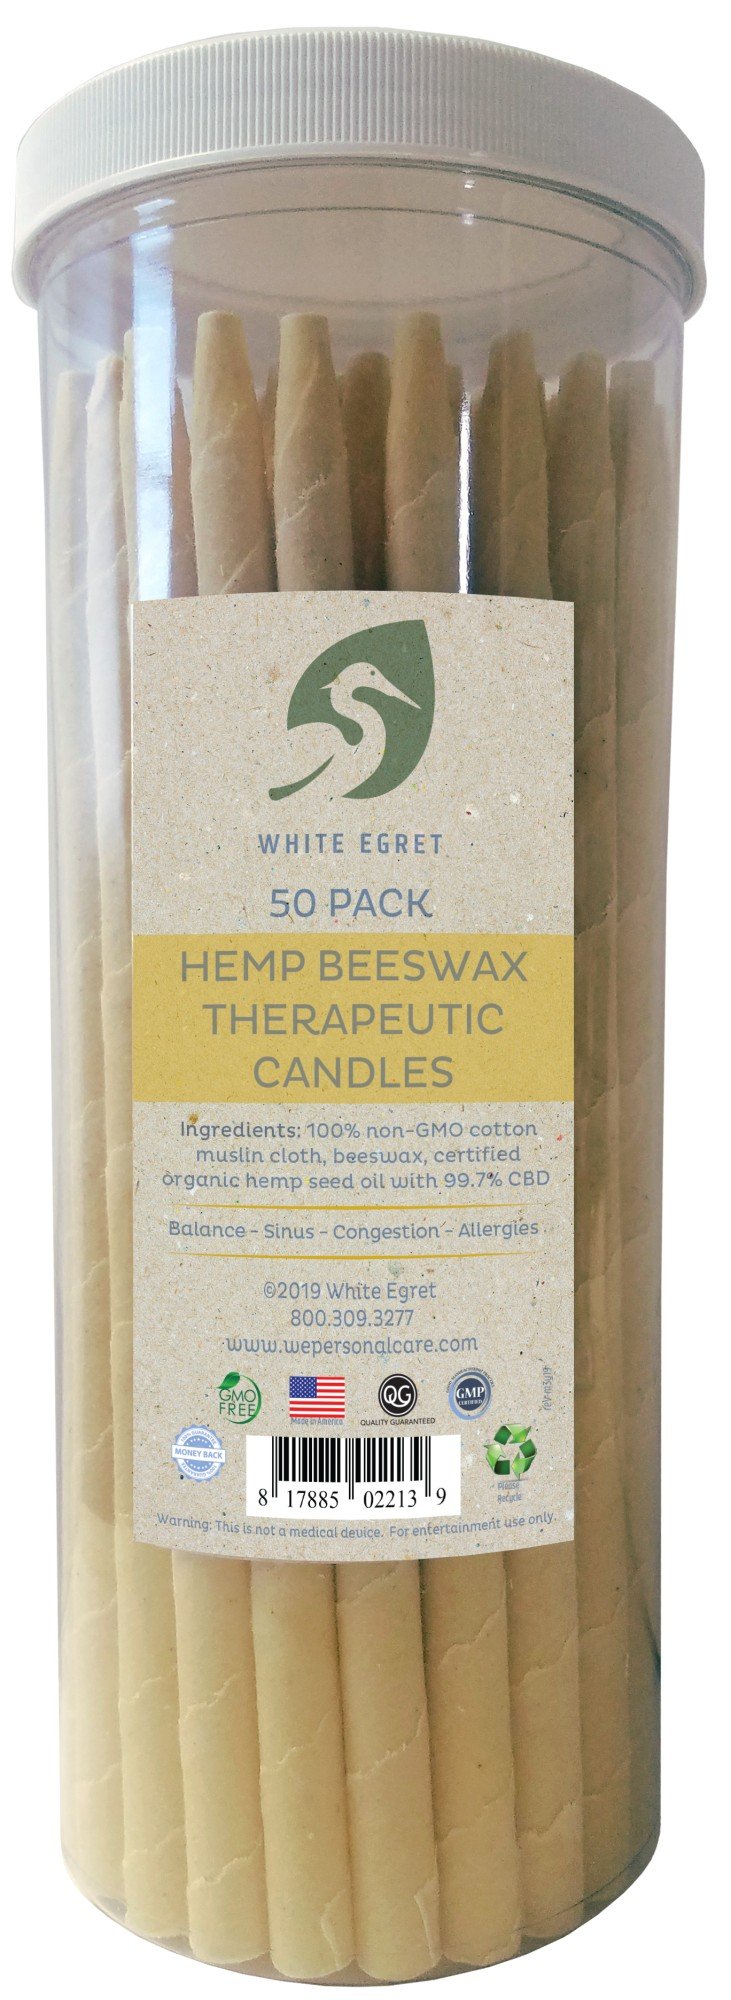 White Egret INC Hemp Beeswax Container with 50 1/2 Inch 50 Pack